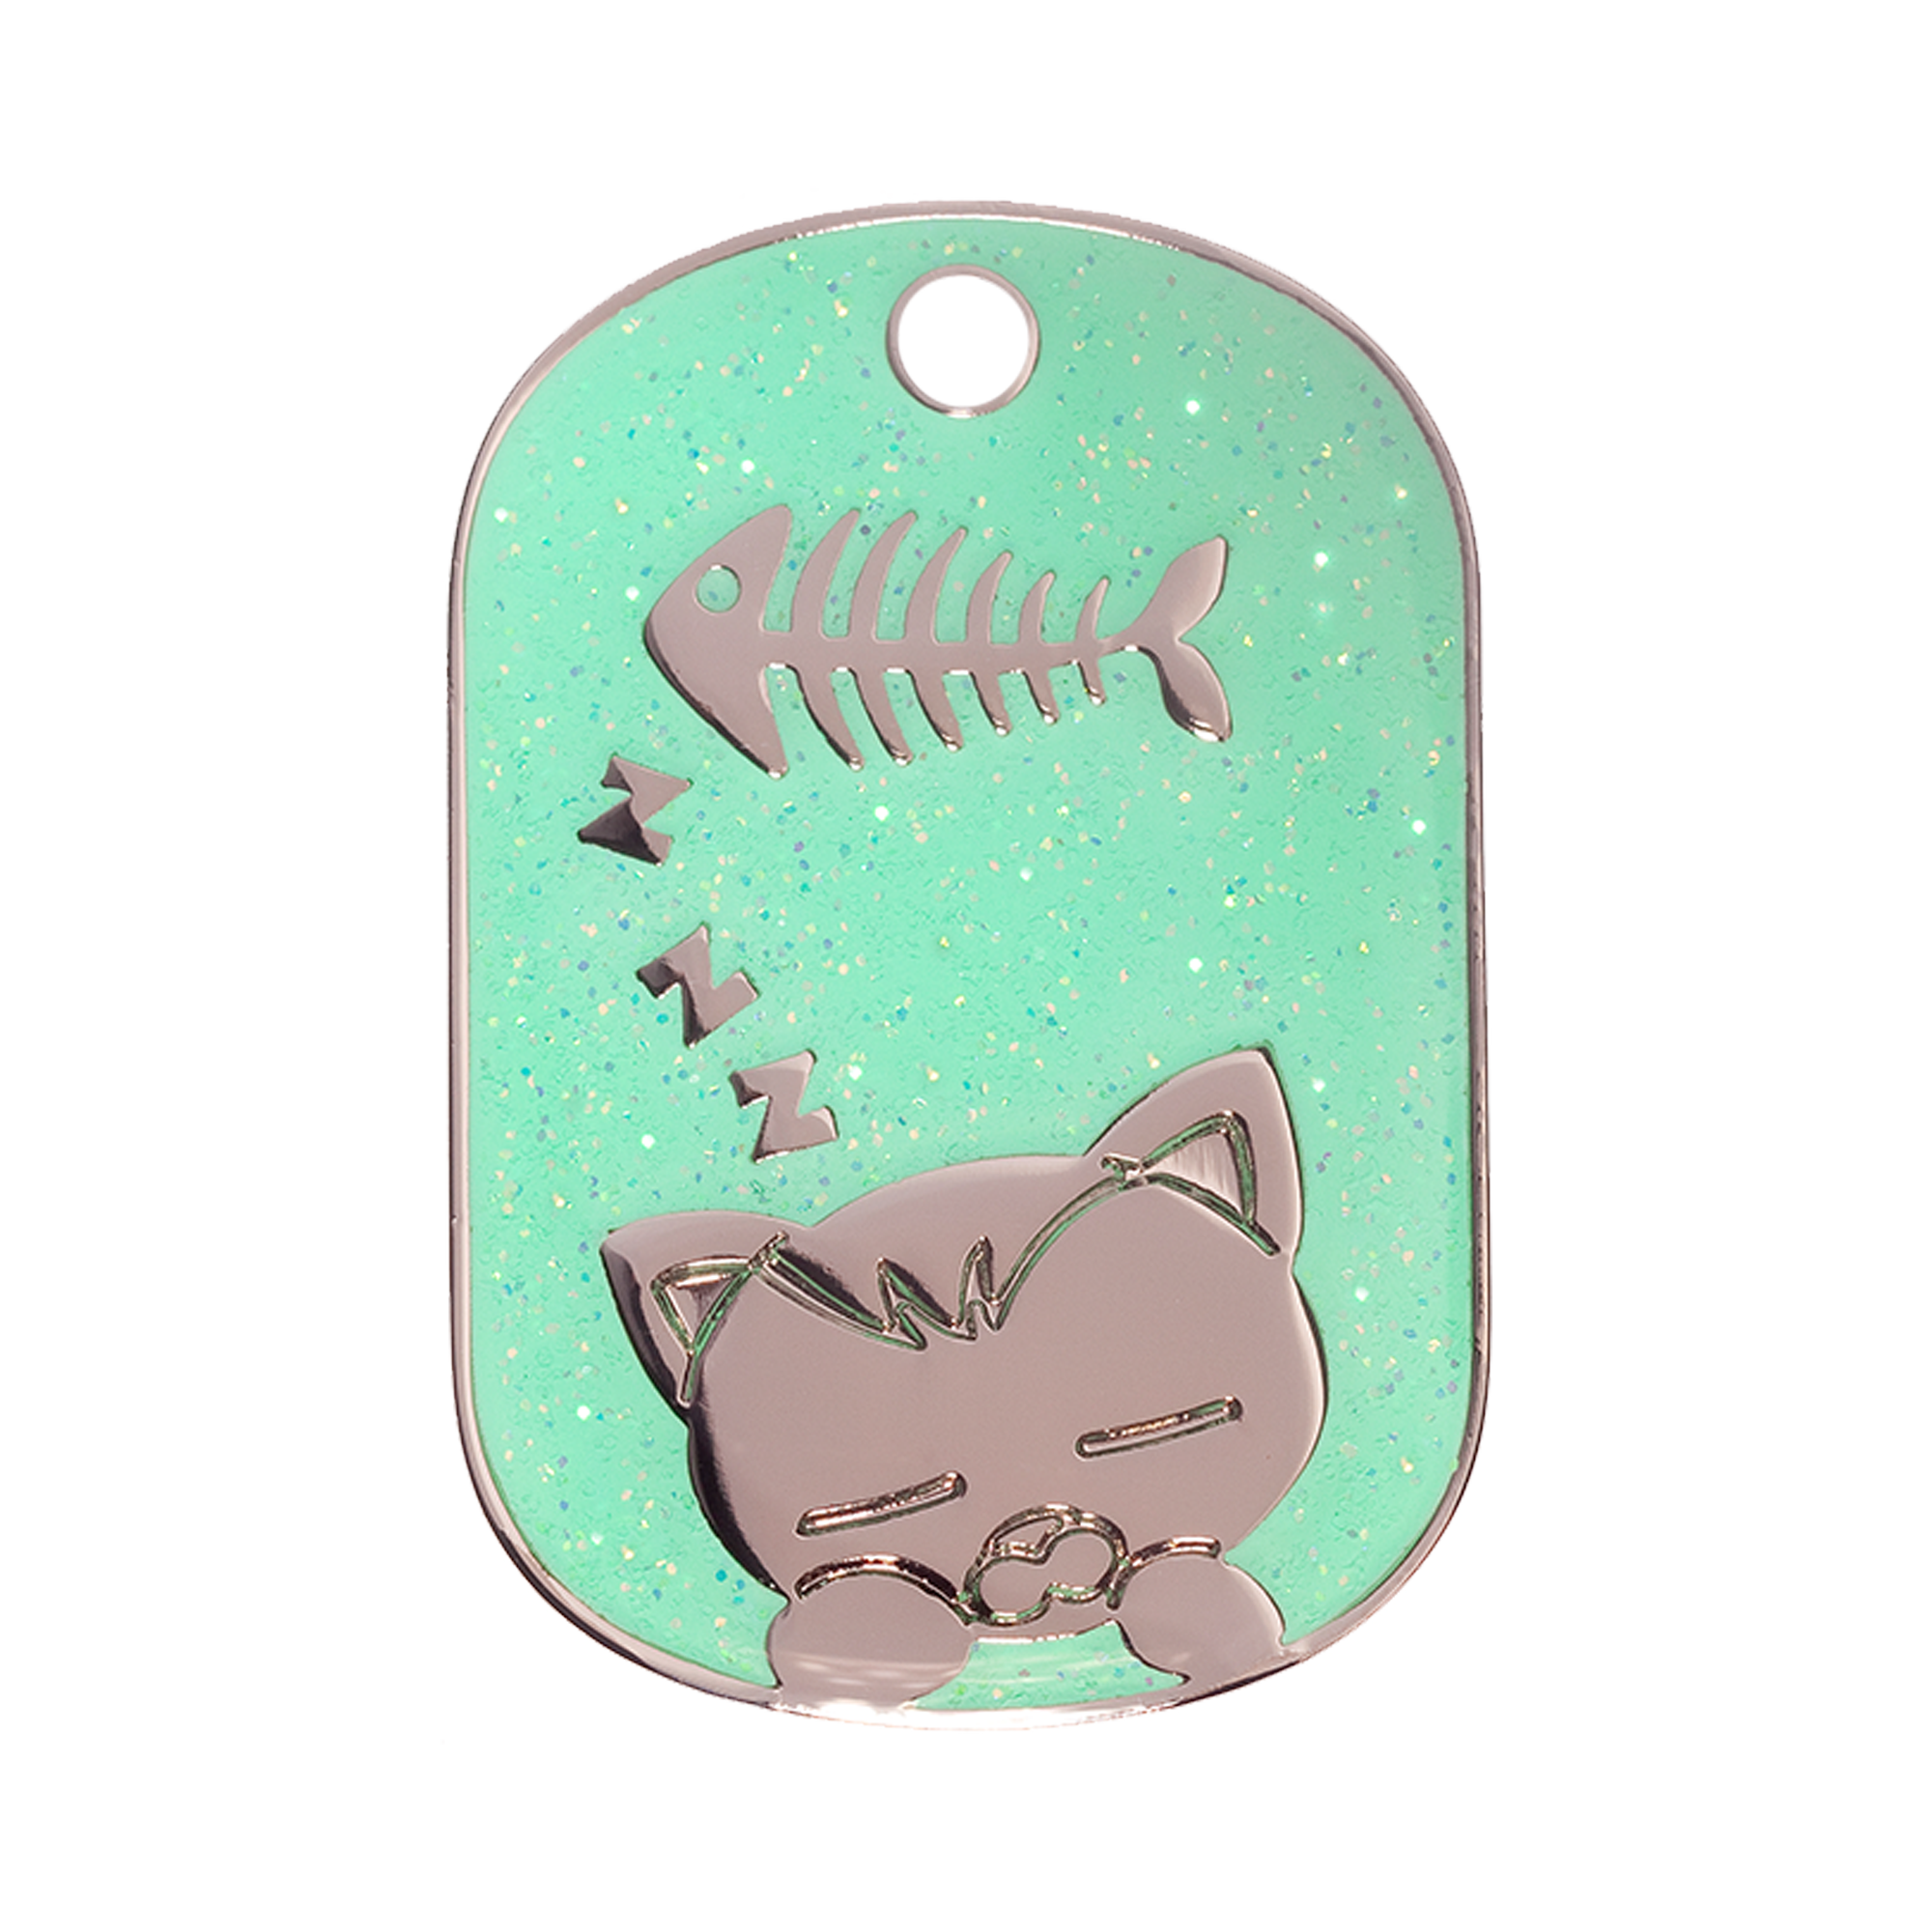 Green Sparkle Sleeping Cat Pet Tag - Shop our Sparkly Pet Tags